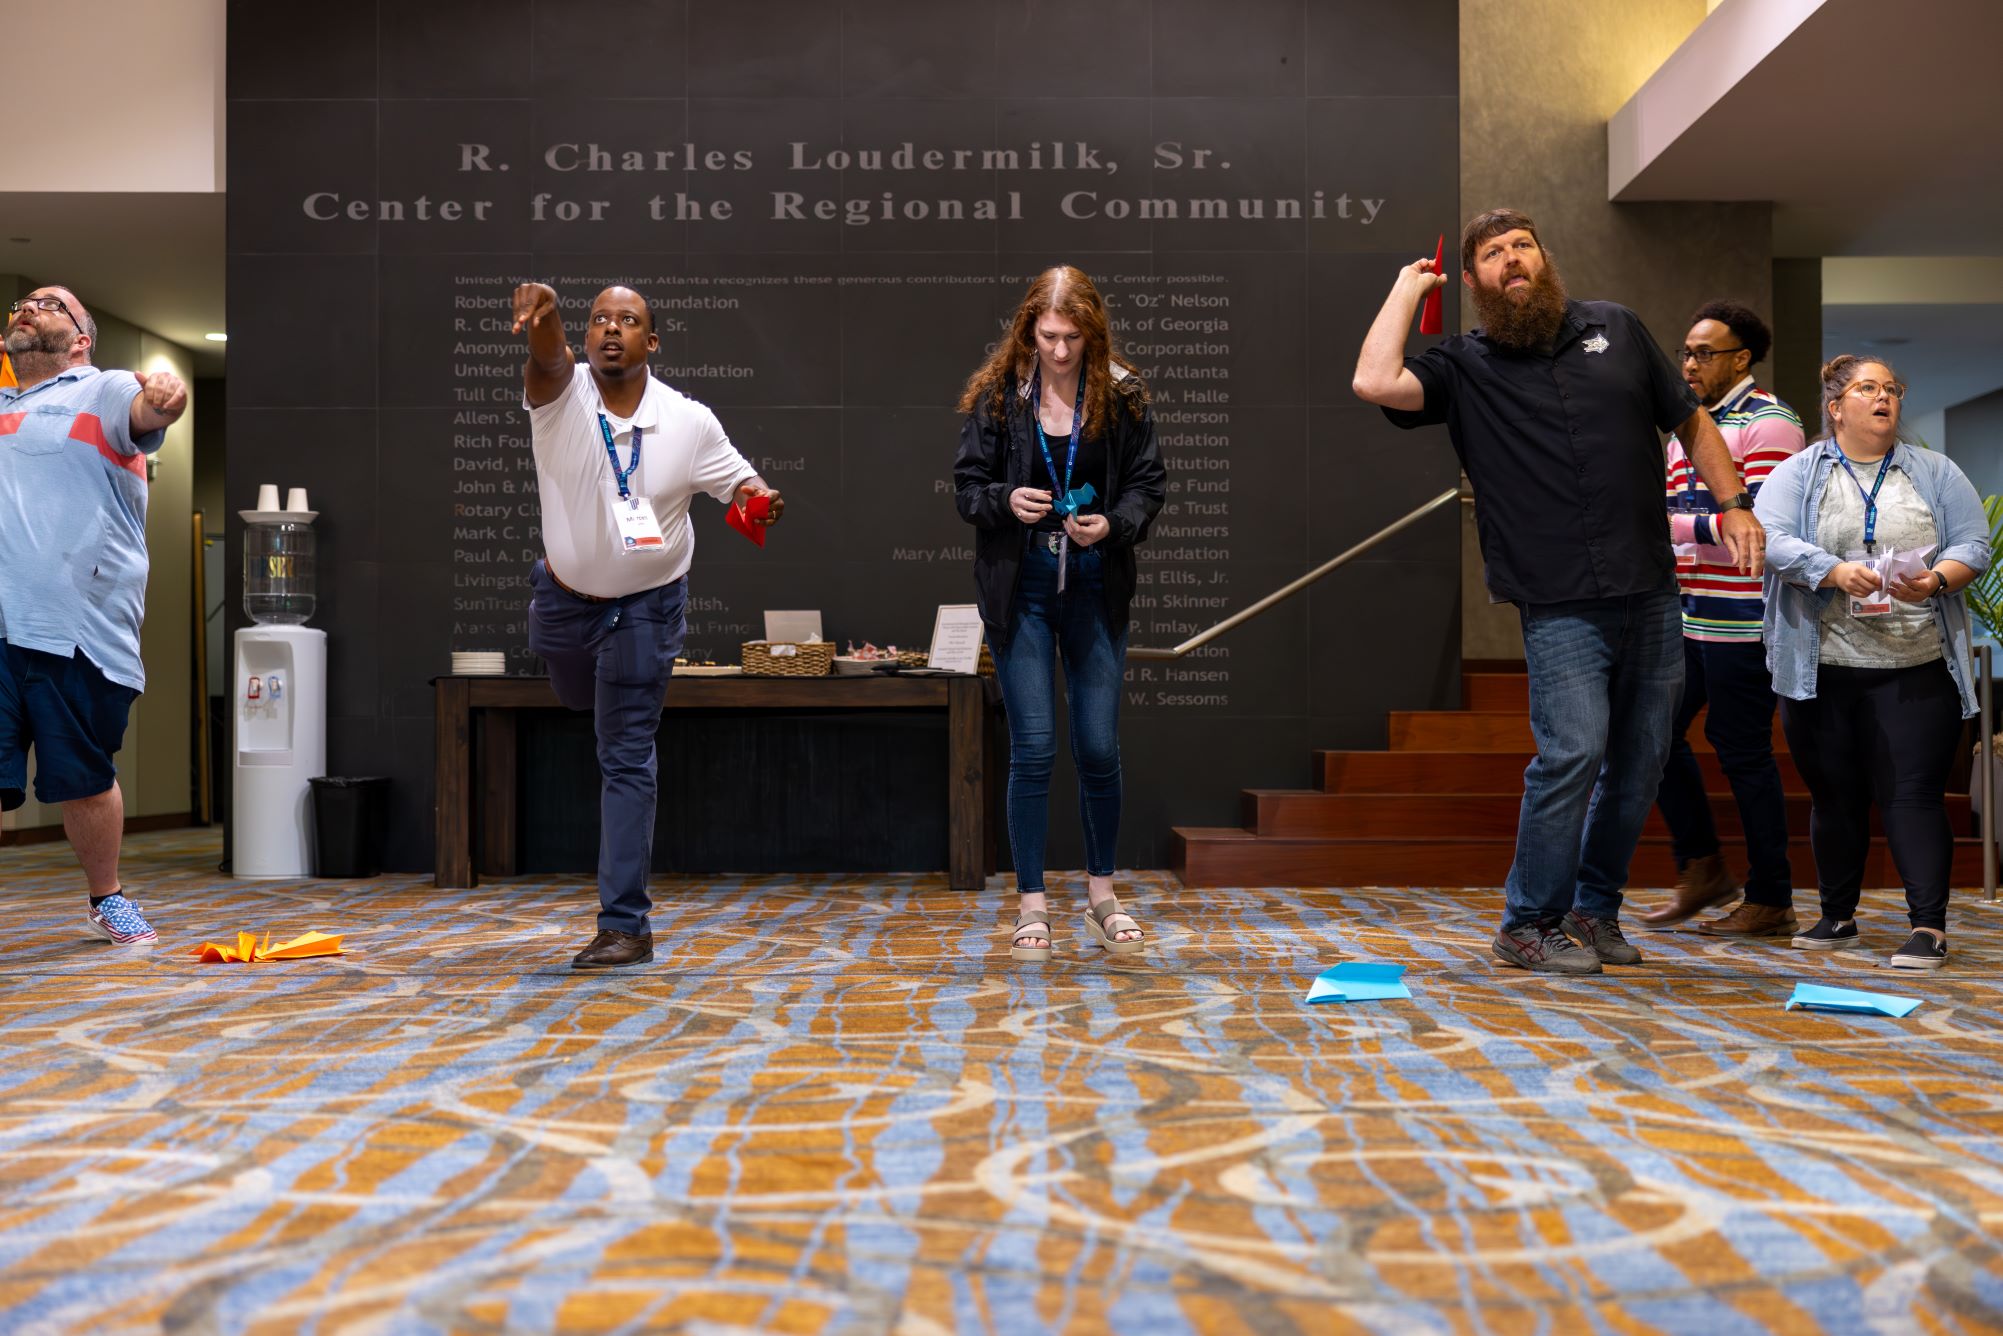 A group of people throwing paper airplanes in a lobby setting.